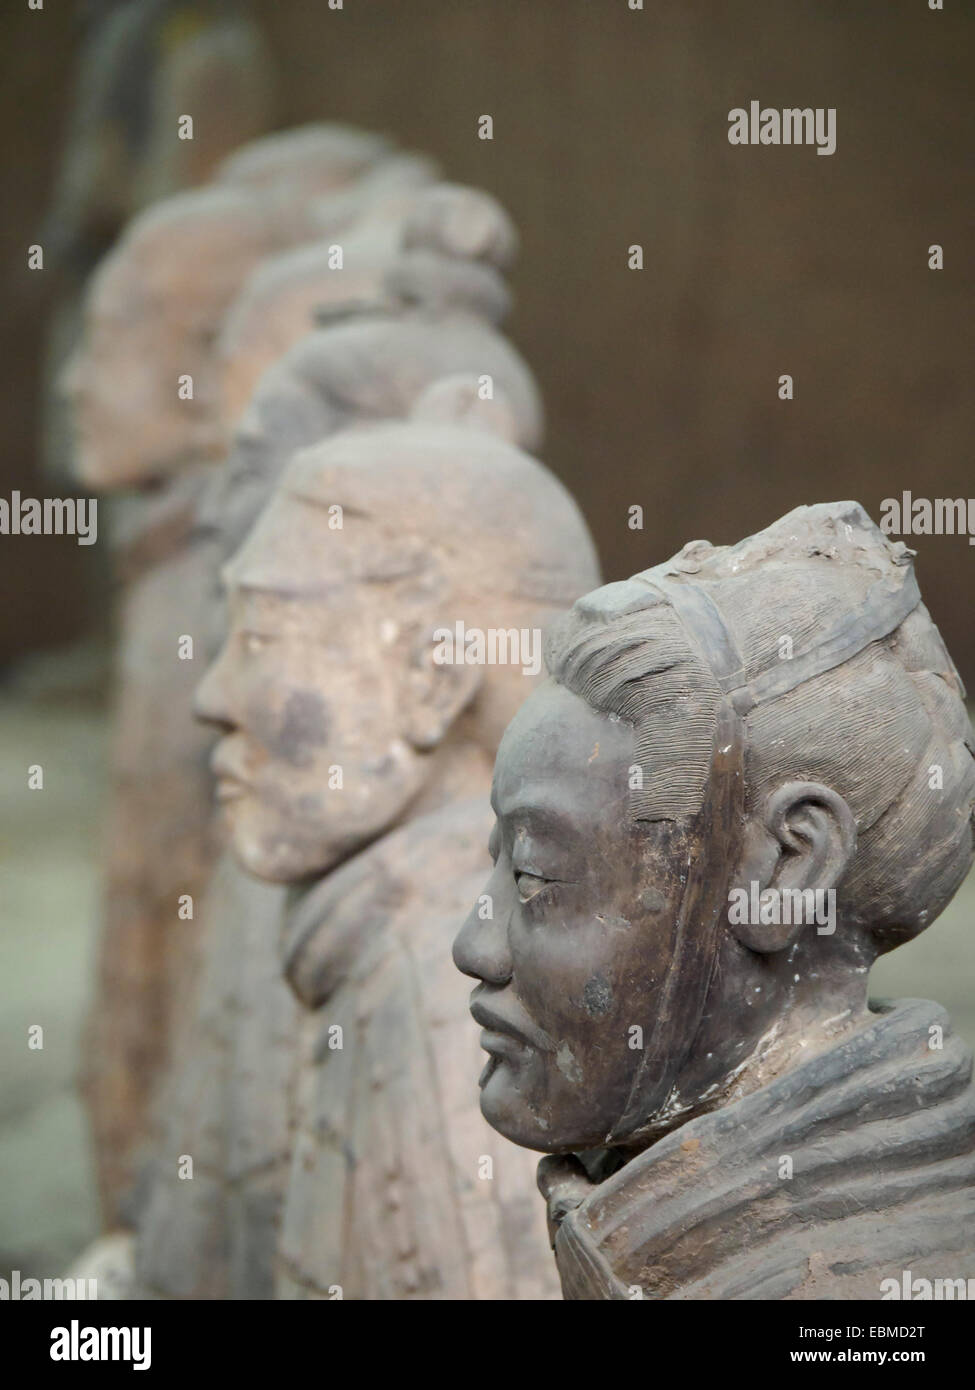 Emperor Qin Shi Huang's terracotta army pit 1 in Xian, Shaanxi province, China Stock Photo